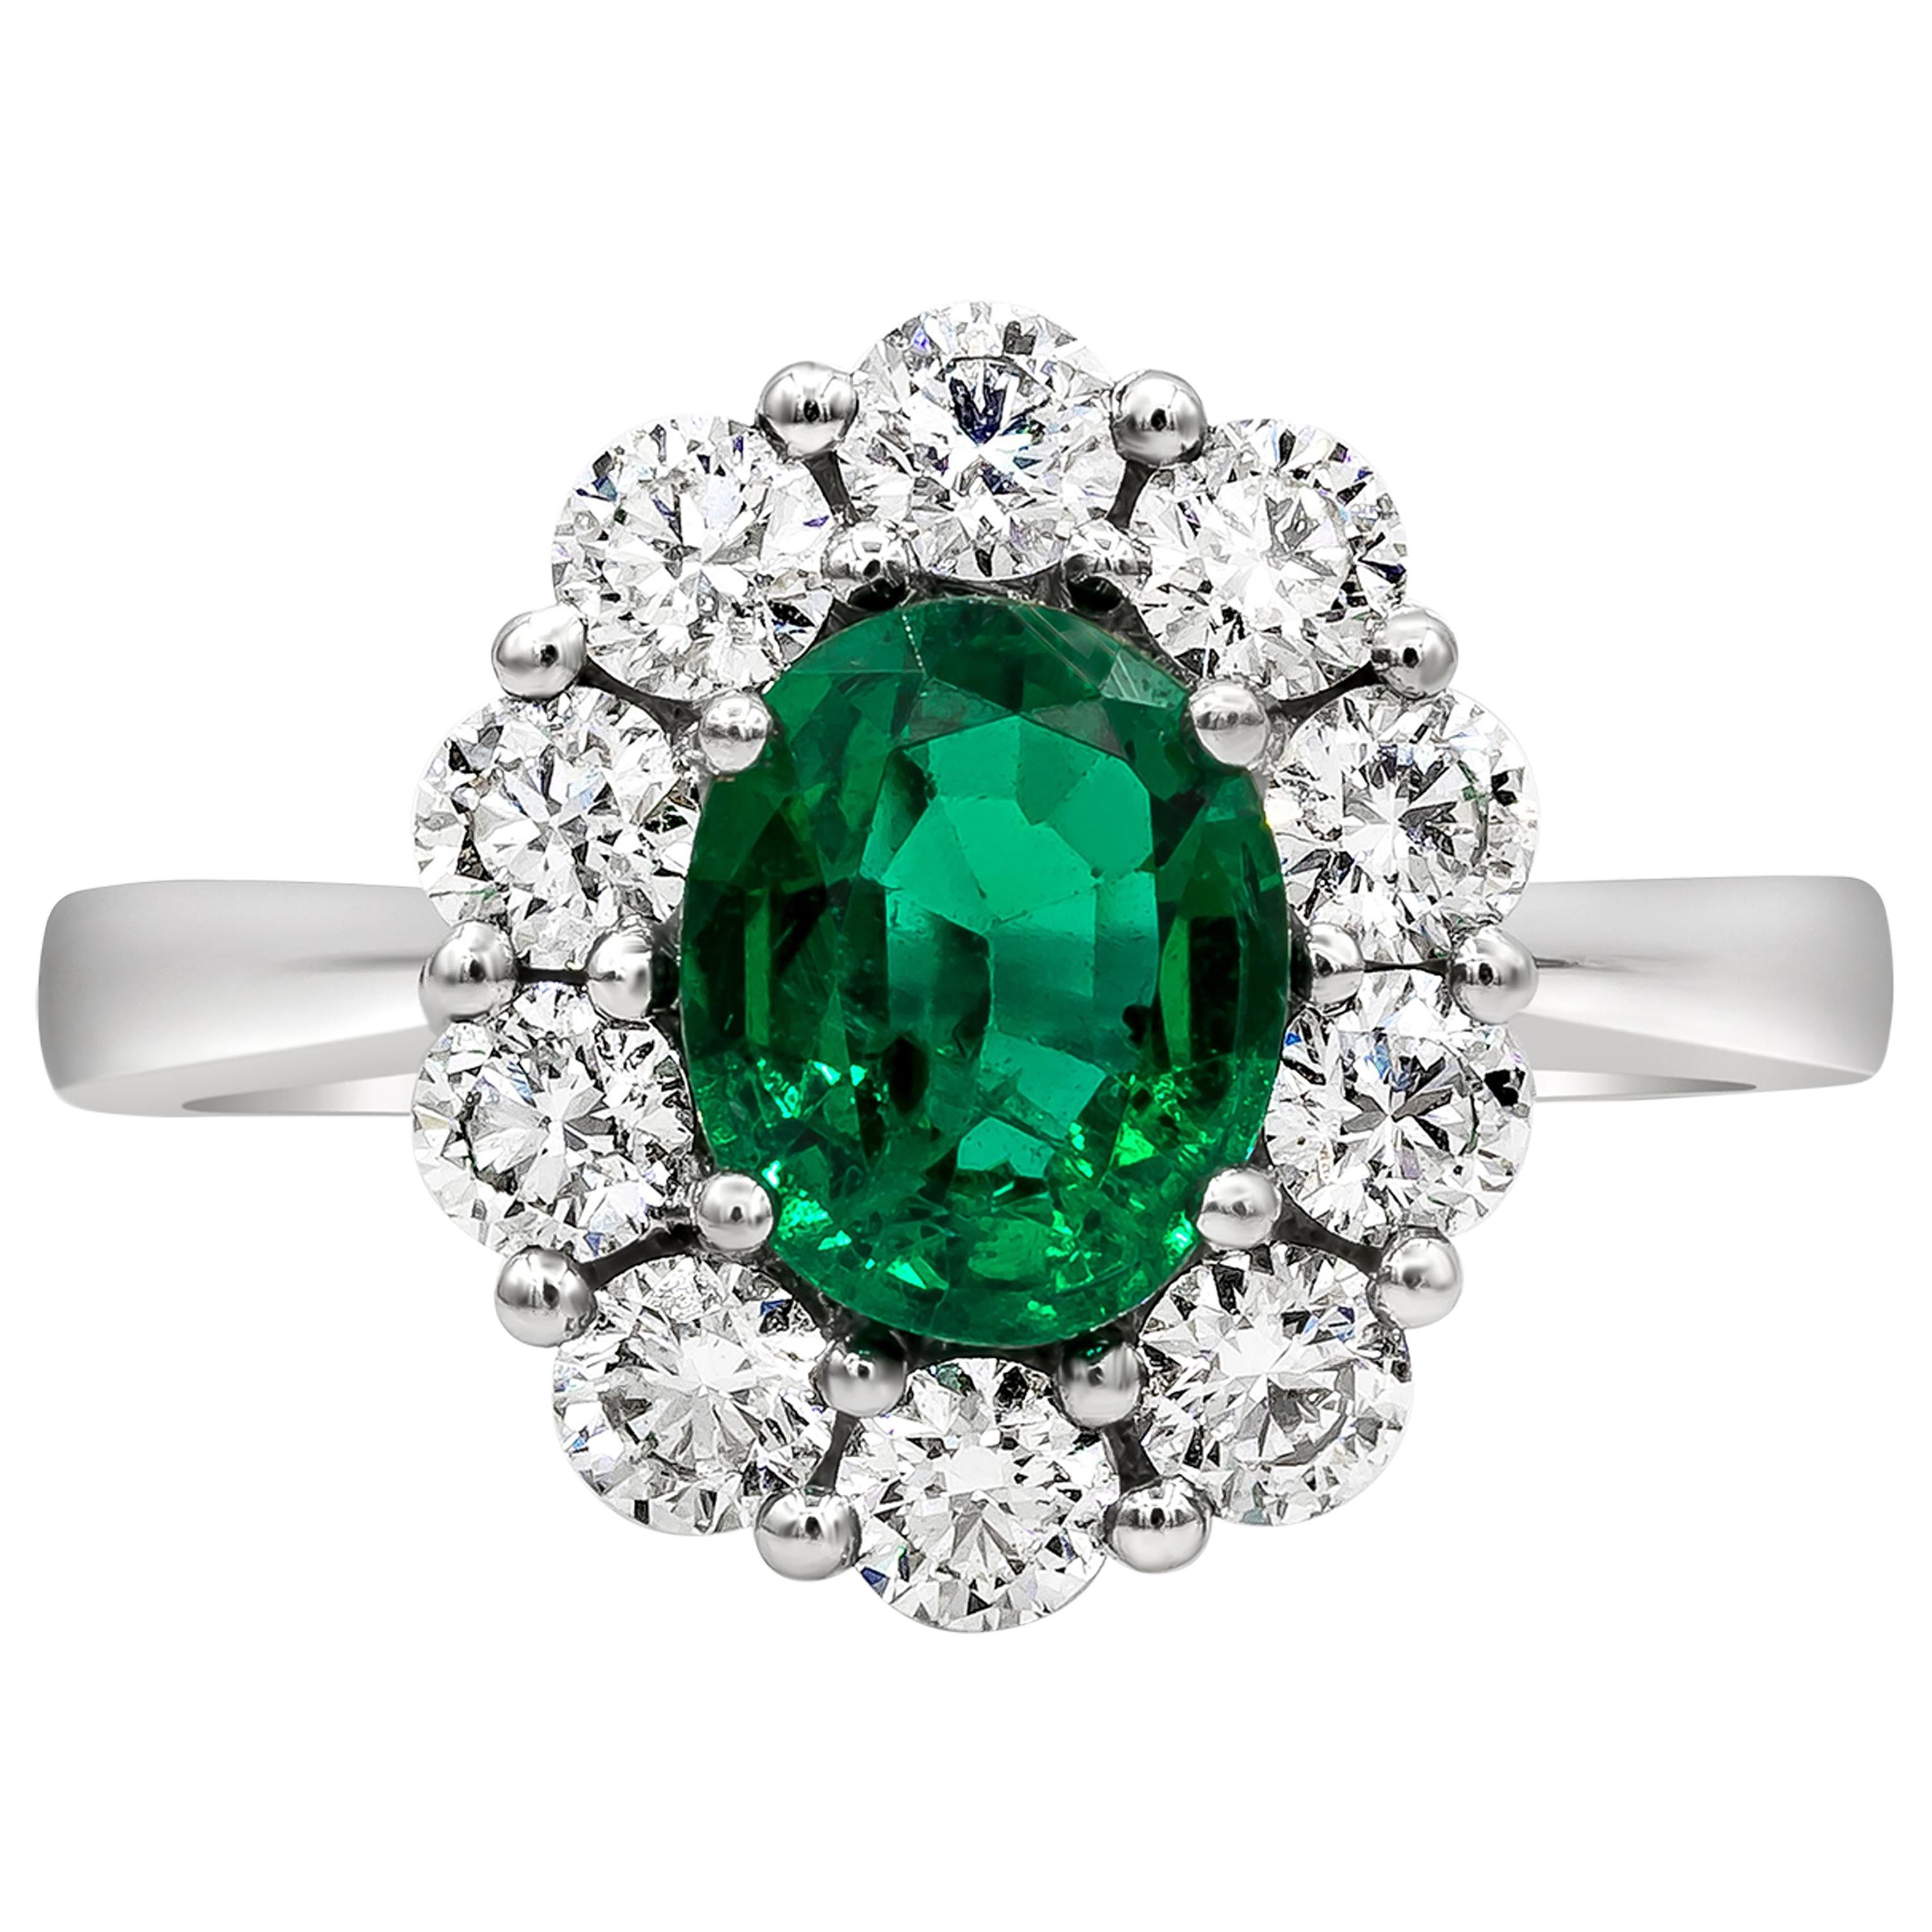 Roman Malakov 1.12 Carat Oval Cut Green Emerald and Diamond Halo Engagement Ring For Sale